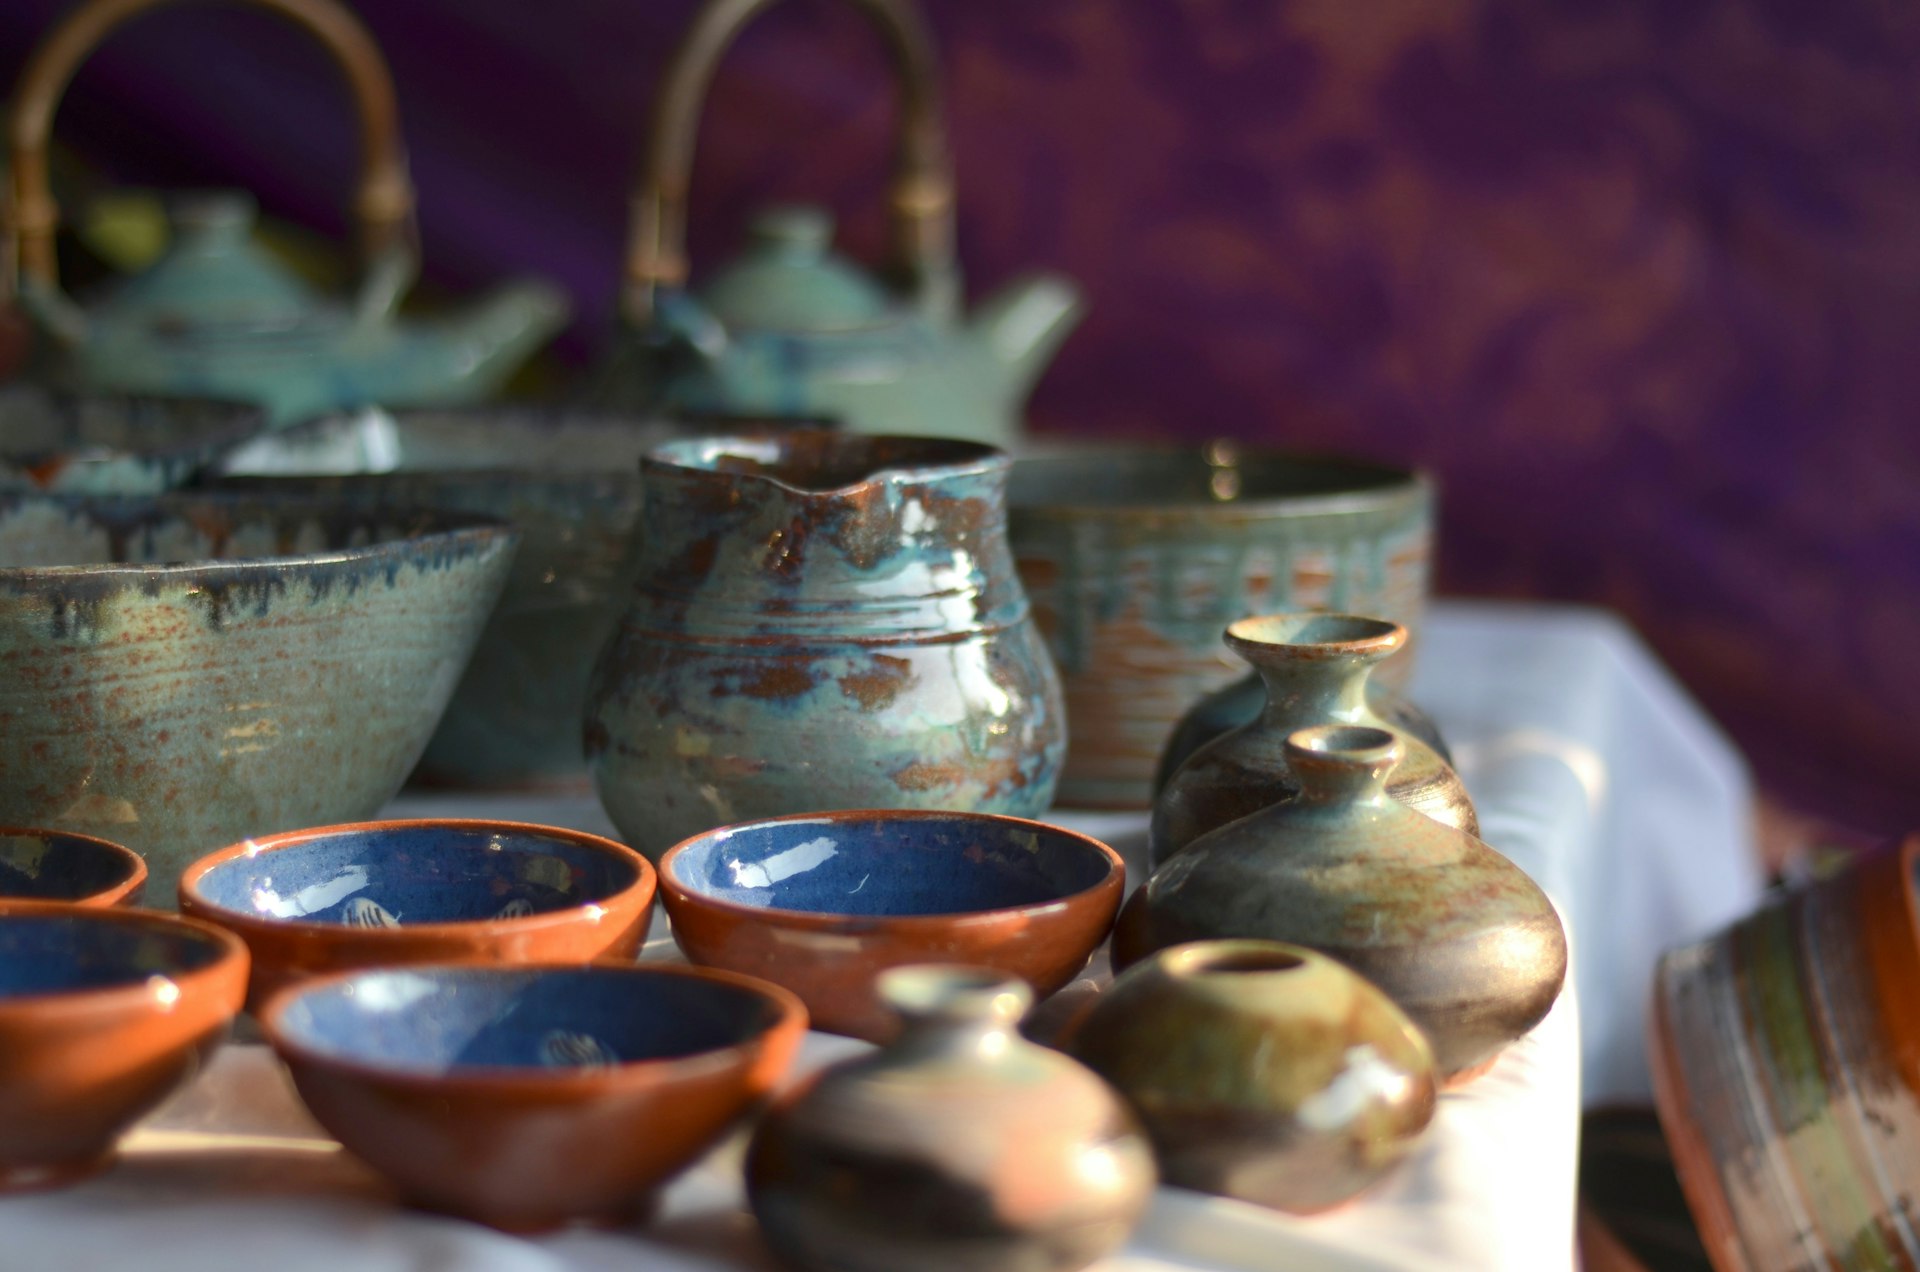 Andretta pottery on sale at a stall in Delhi. The wares include a series of small bowls, jugs and ceramic pots.